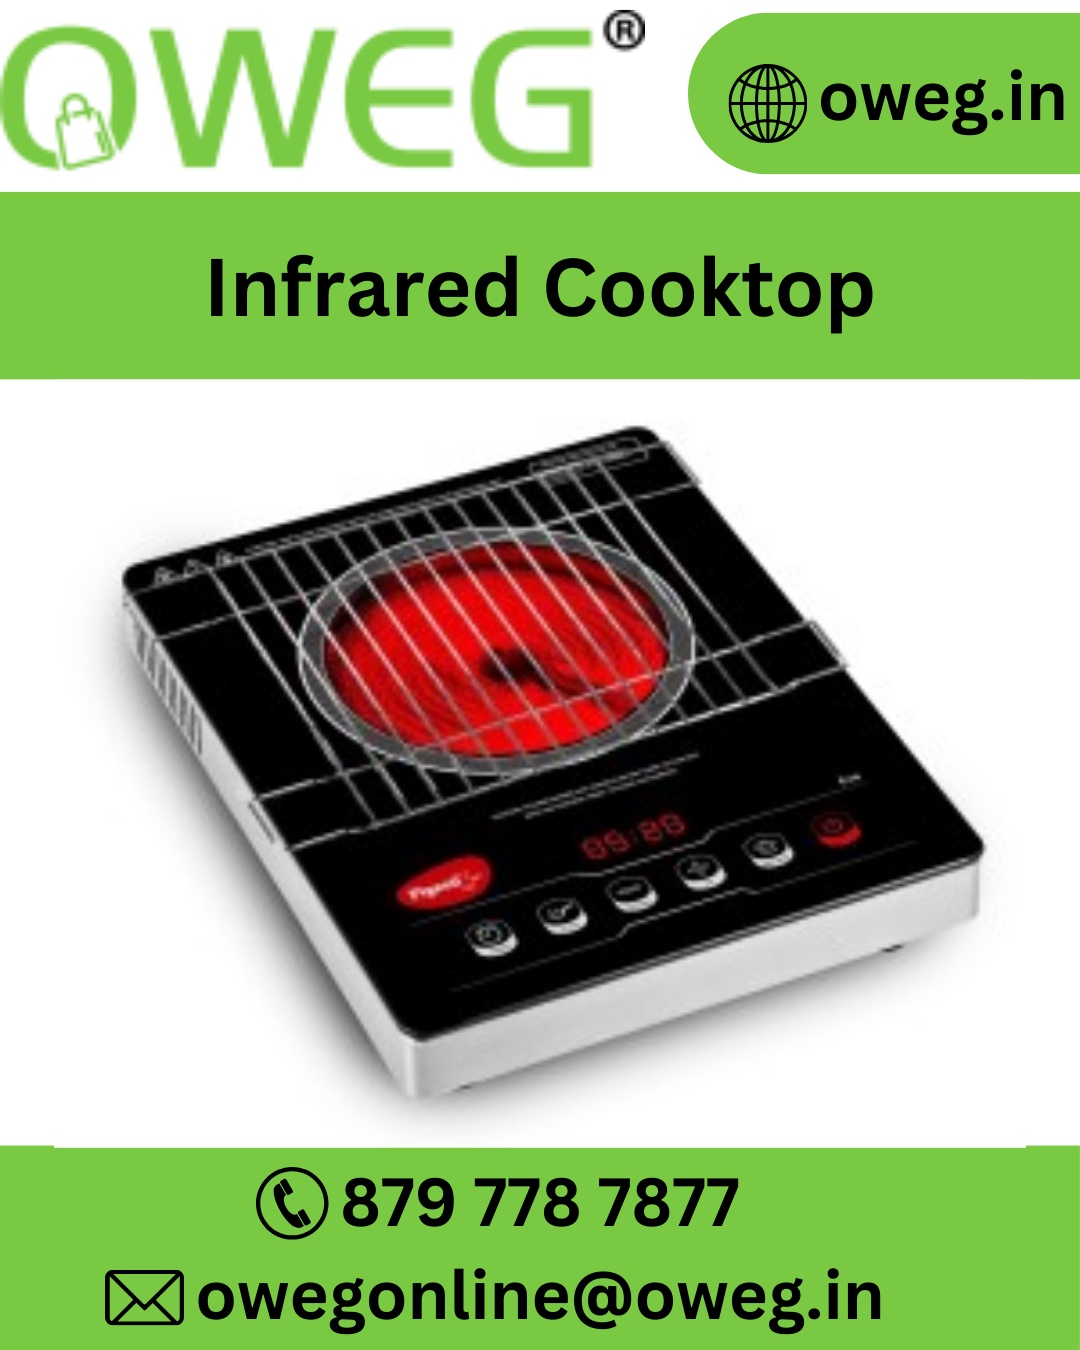 Discover the Future of Cooking with Infrared Cooktops